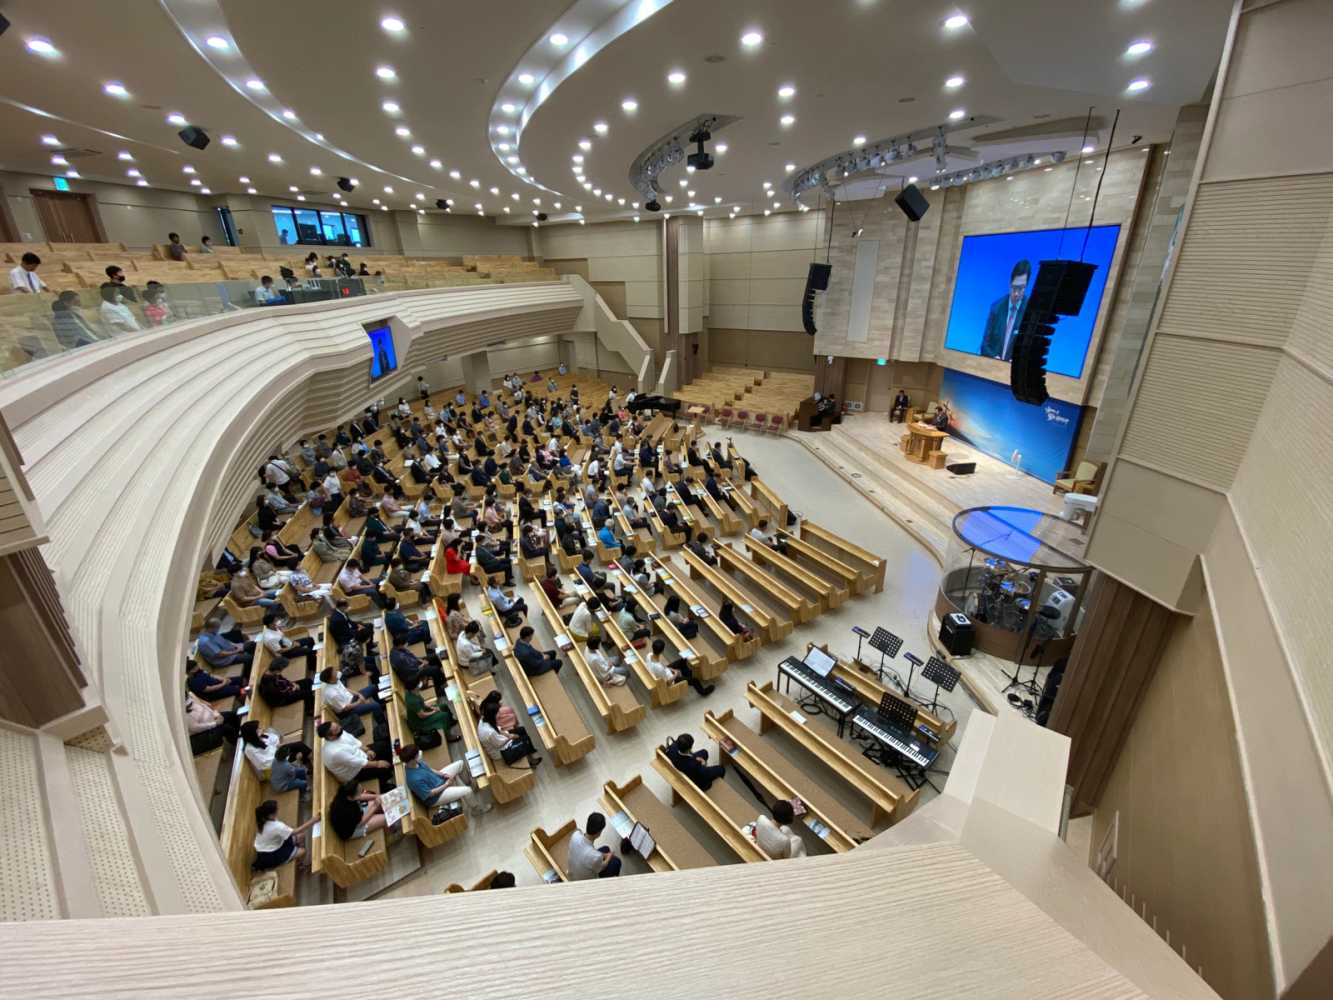 Yeomkwang Church is a 117,790sq.ft facility comprising a Vision Centre and a main hall